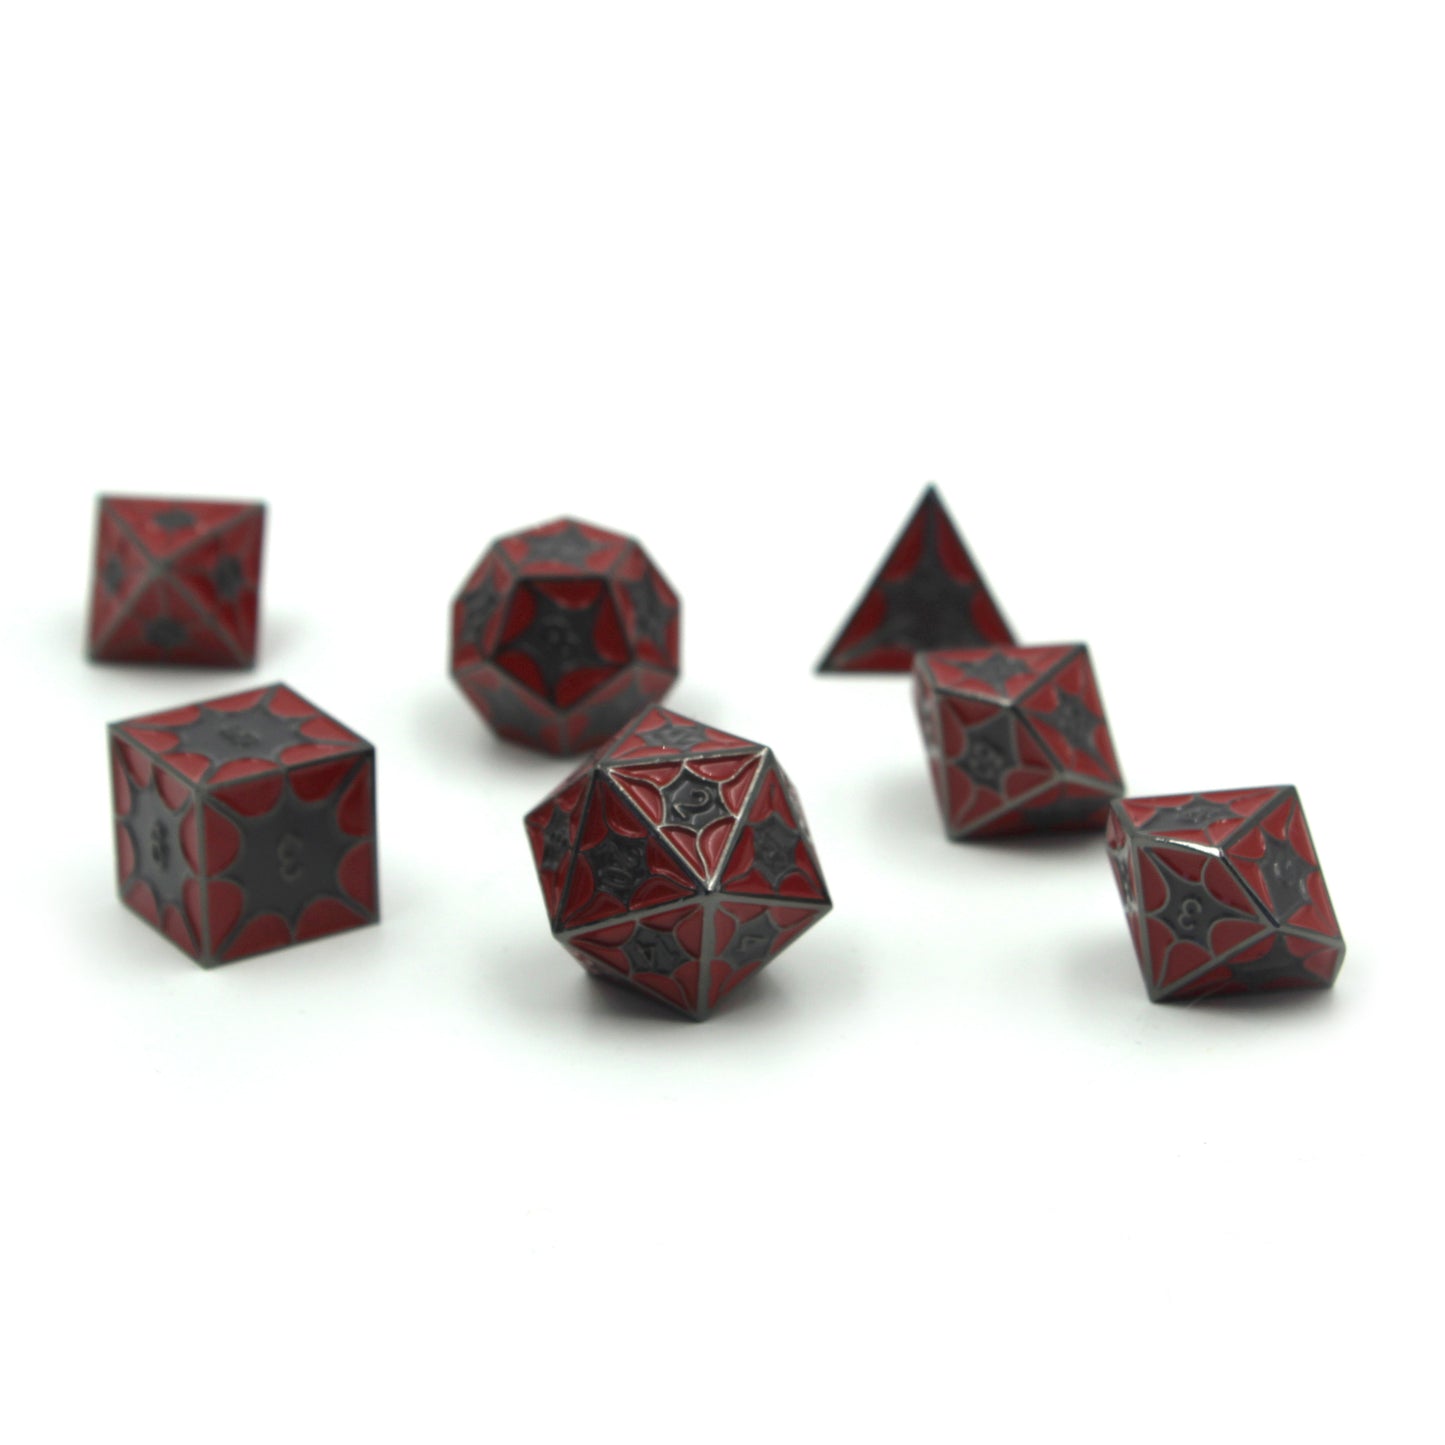 Red Dragonscale dice